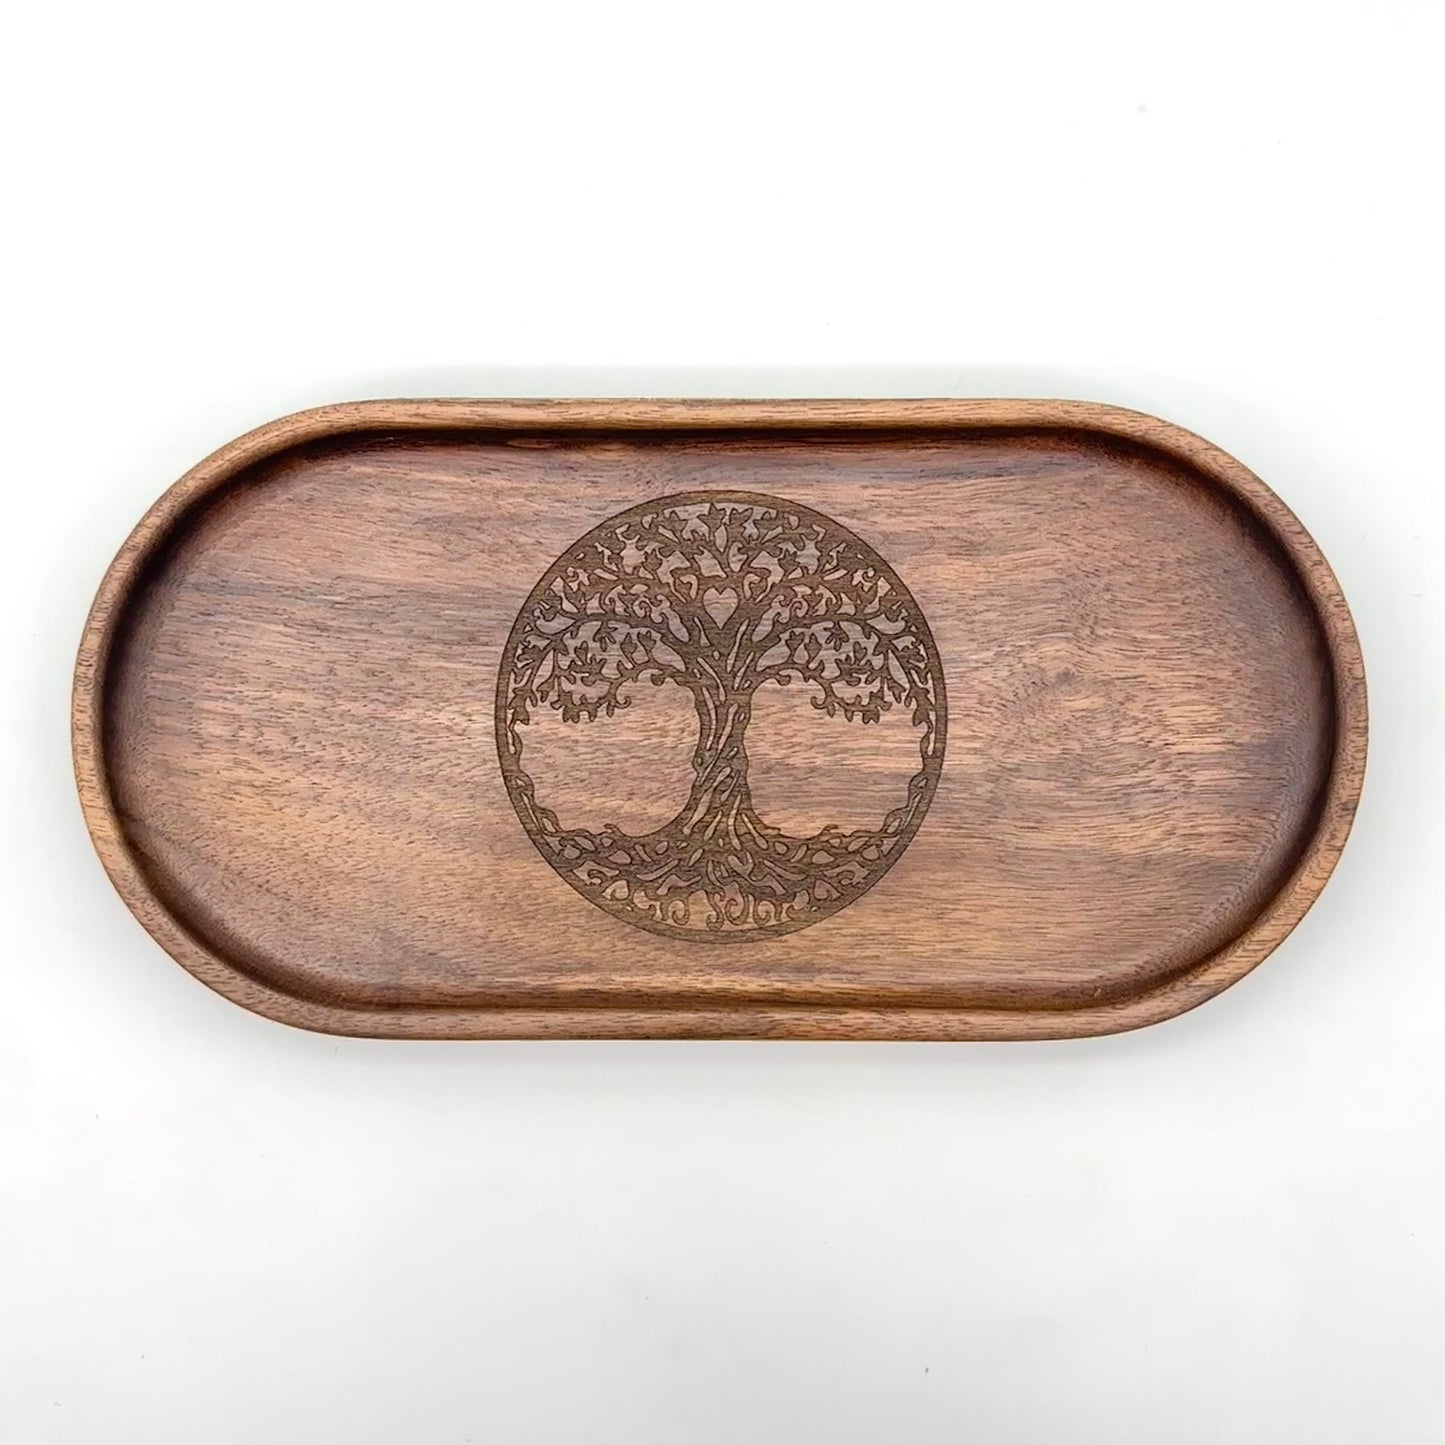 Catch-All Tray (Large) | Walnut/Cherry Wood | Handcrafted, Laser Etched Design | 5x10